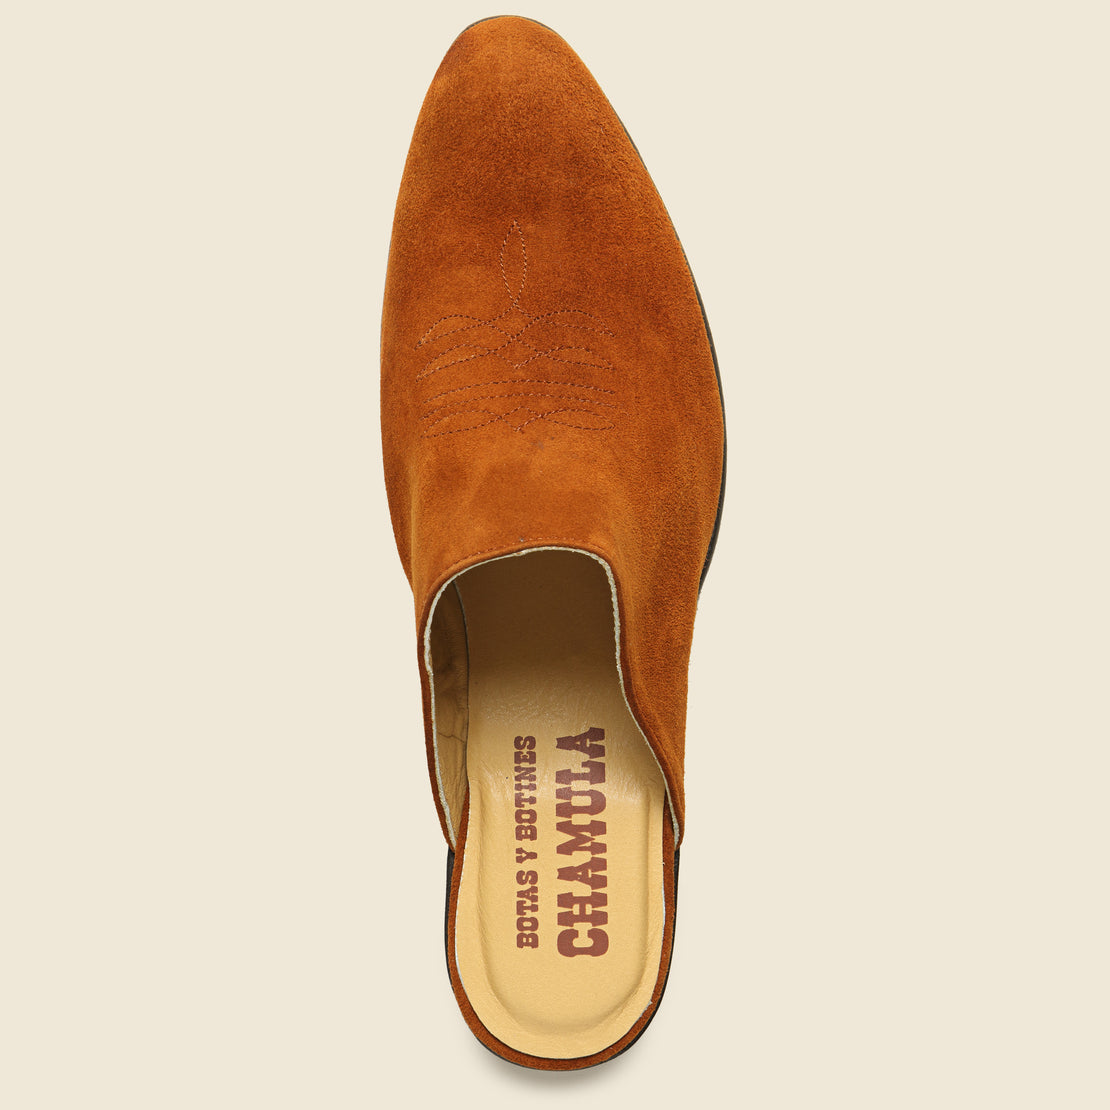 Sueco Slip On Mule - Cognac - Chamula - STAG Provisions - W - Shoes - Boots